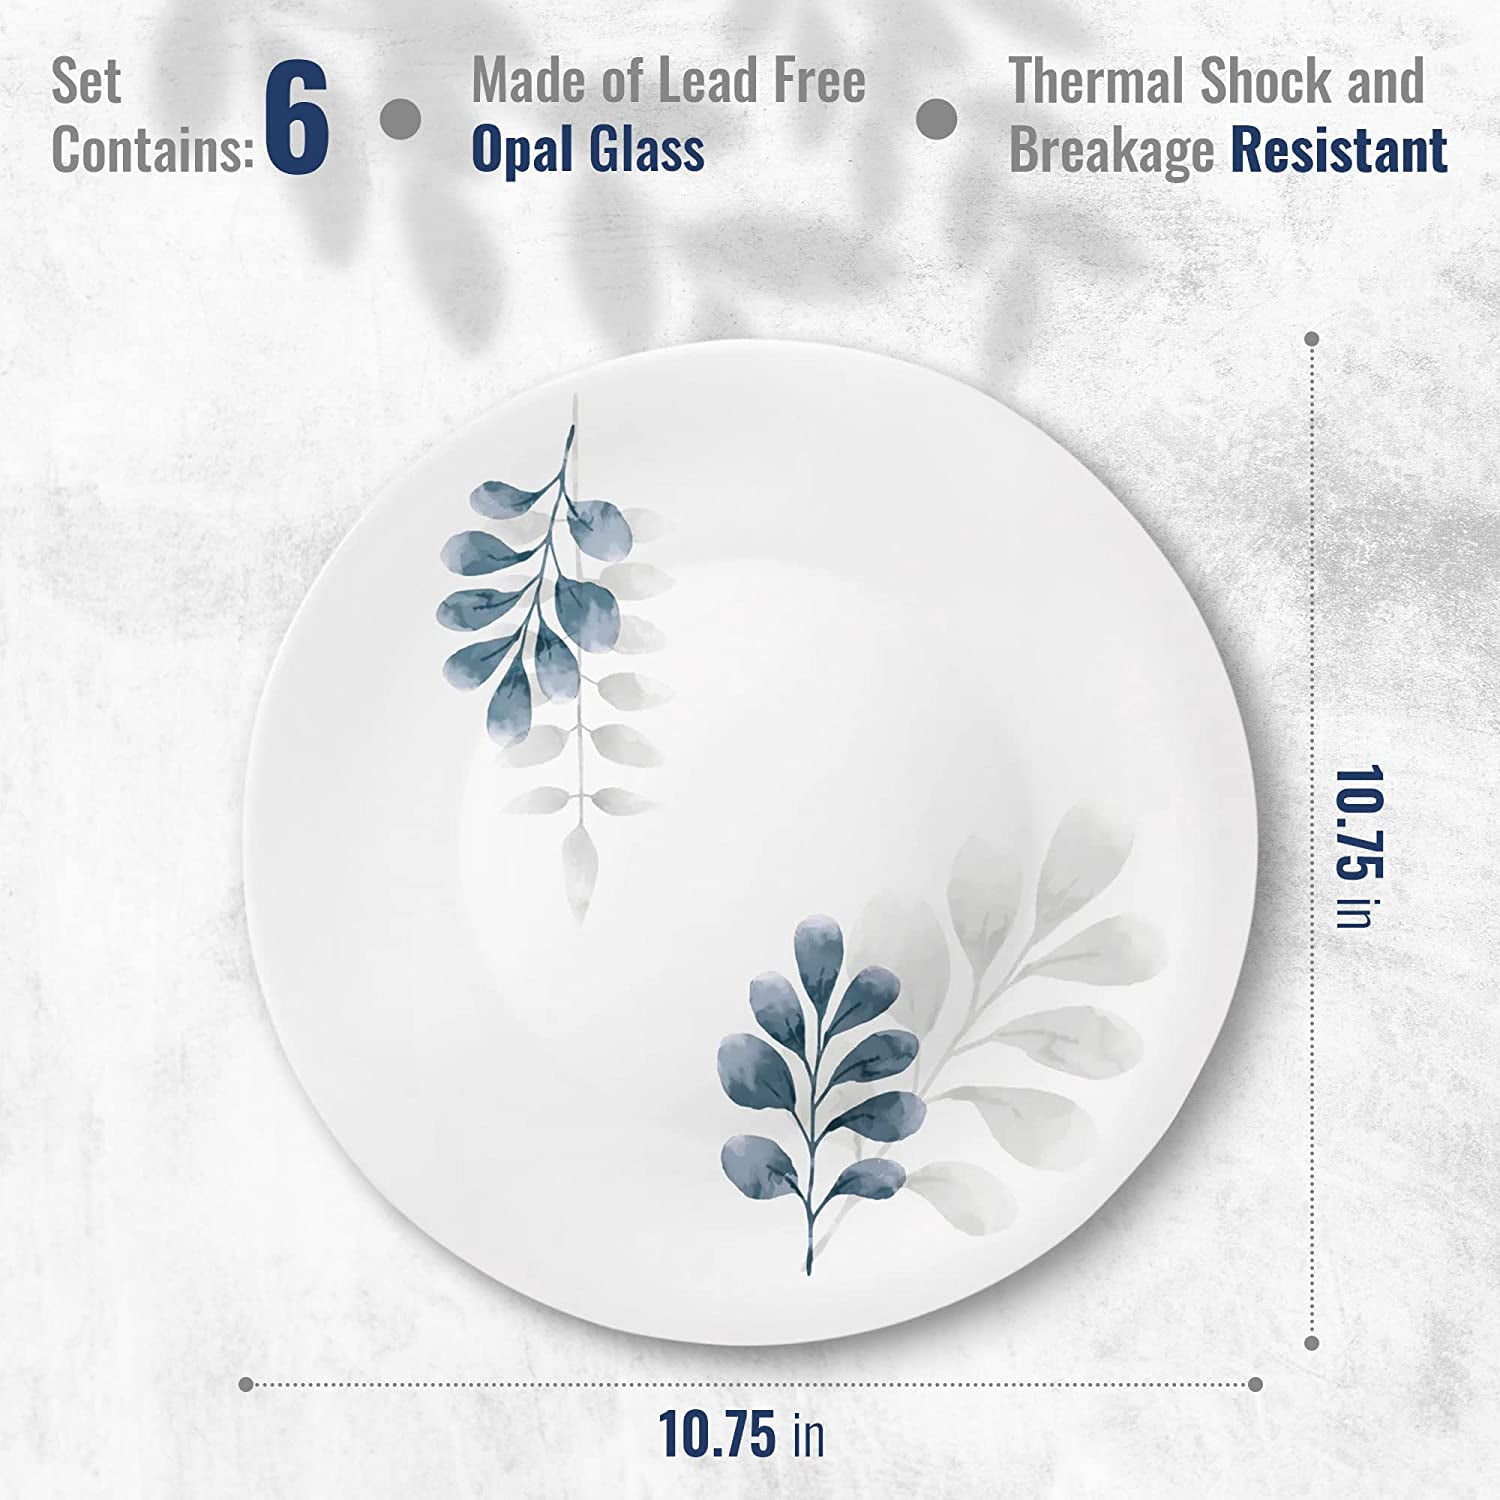 Bormioli Rocco 6- Piece White Moon 10.6 Inch Dinner Plate Tempered Opal  Glass Dishes, Dishwasher & Microwave Safe, Made In Spain : Target